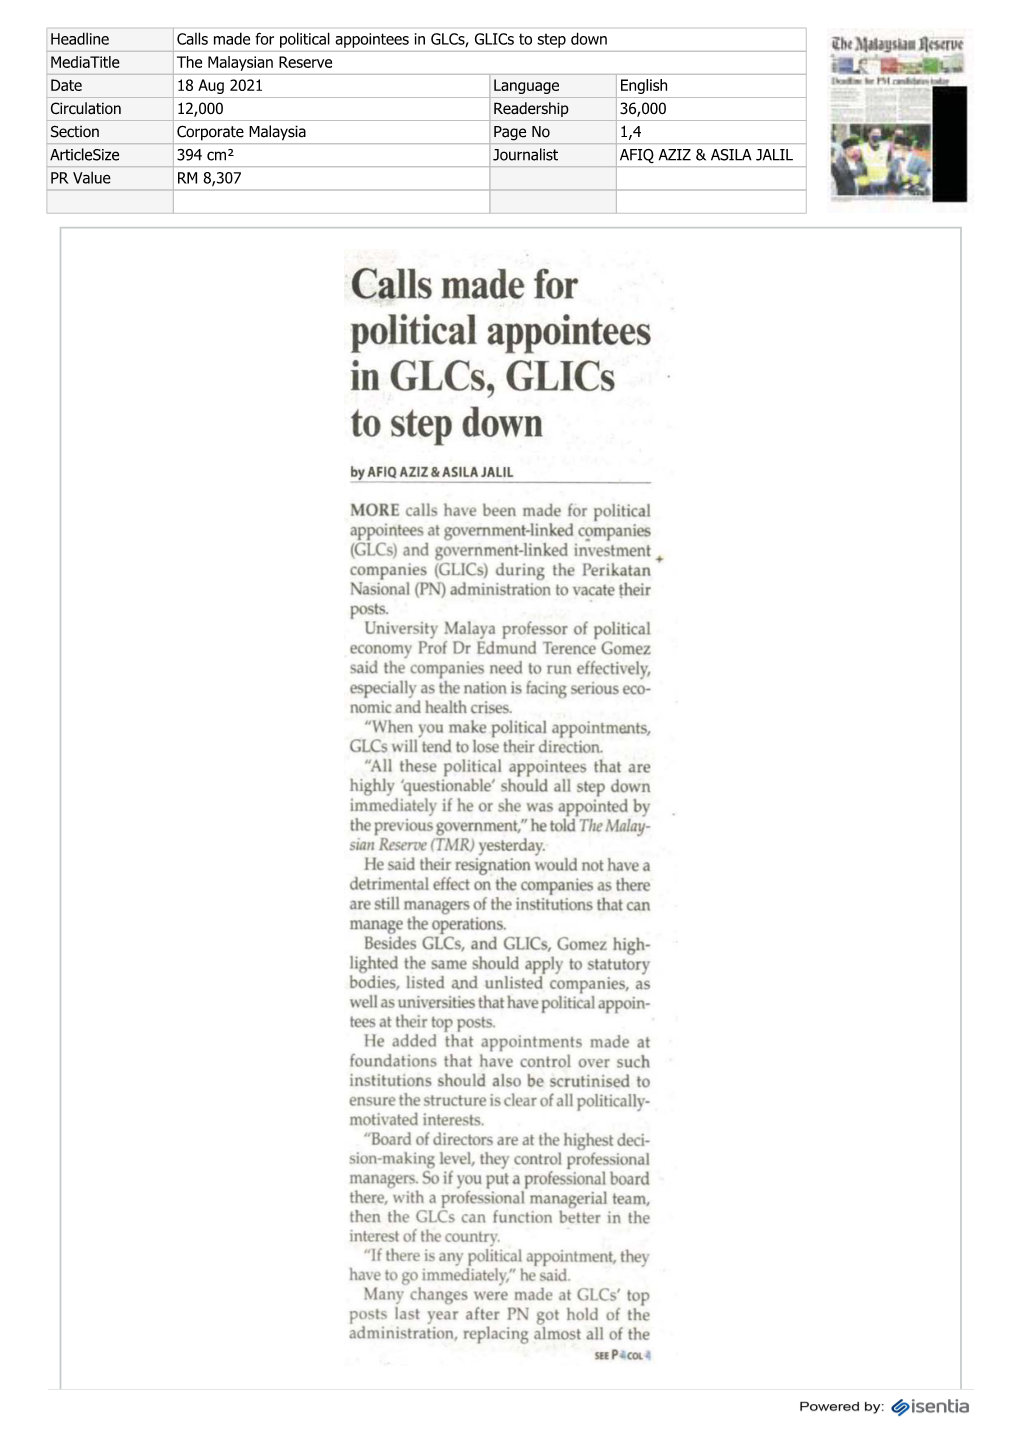 Calls Made for Political Appointees in Glcs, Glics to Step Down